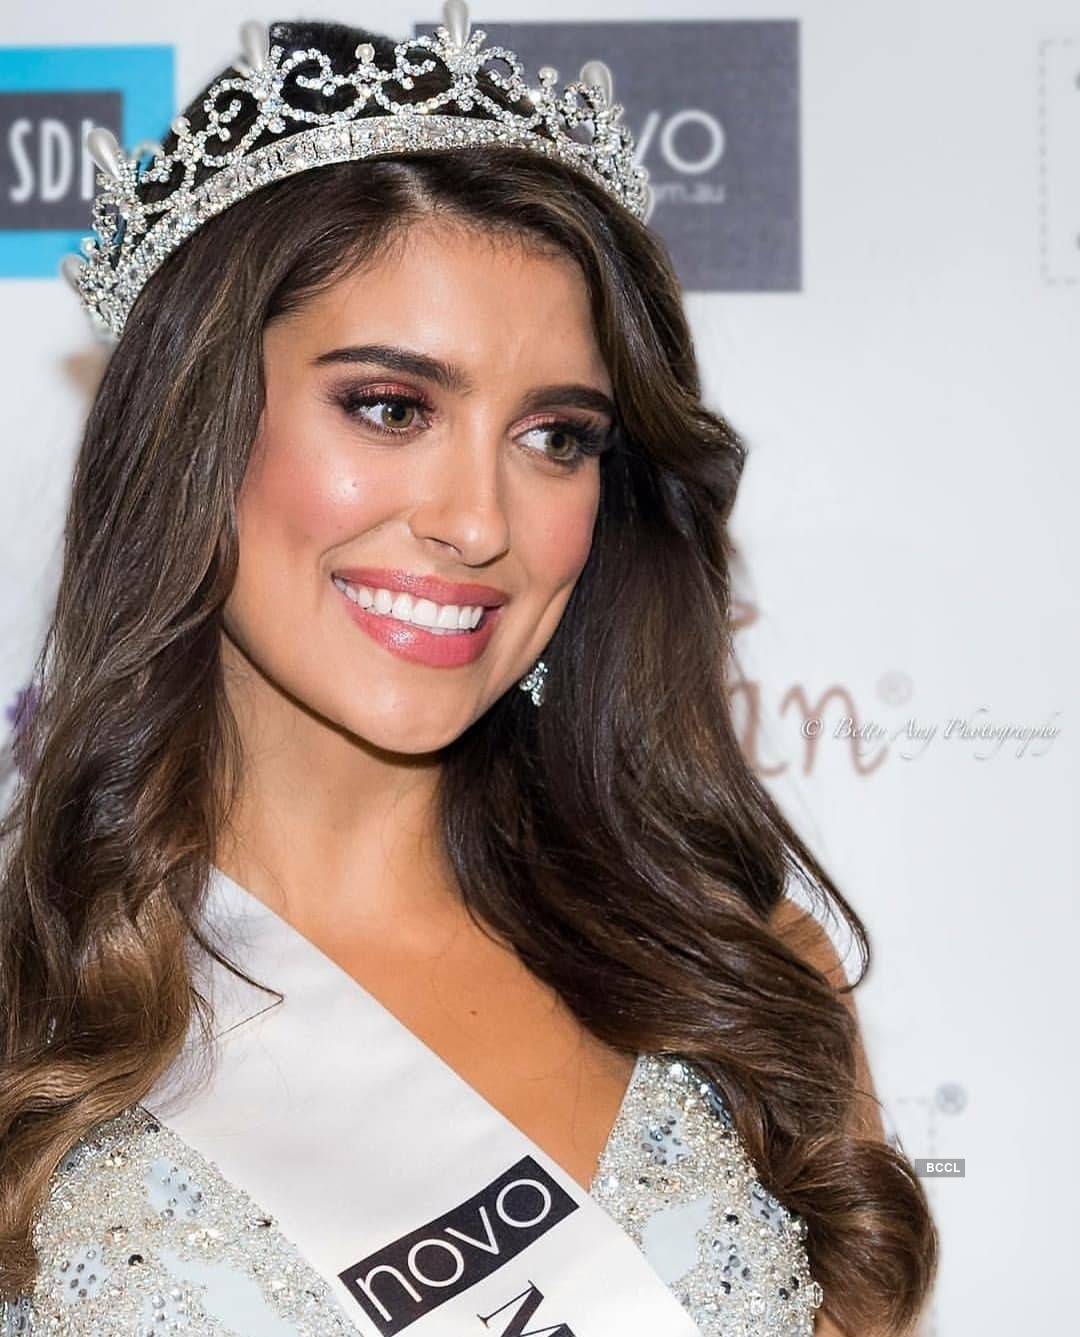 The gorgeous Taylah Cannon crowned Miss World Australia 2018